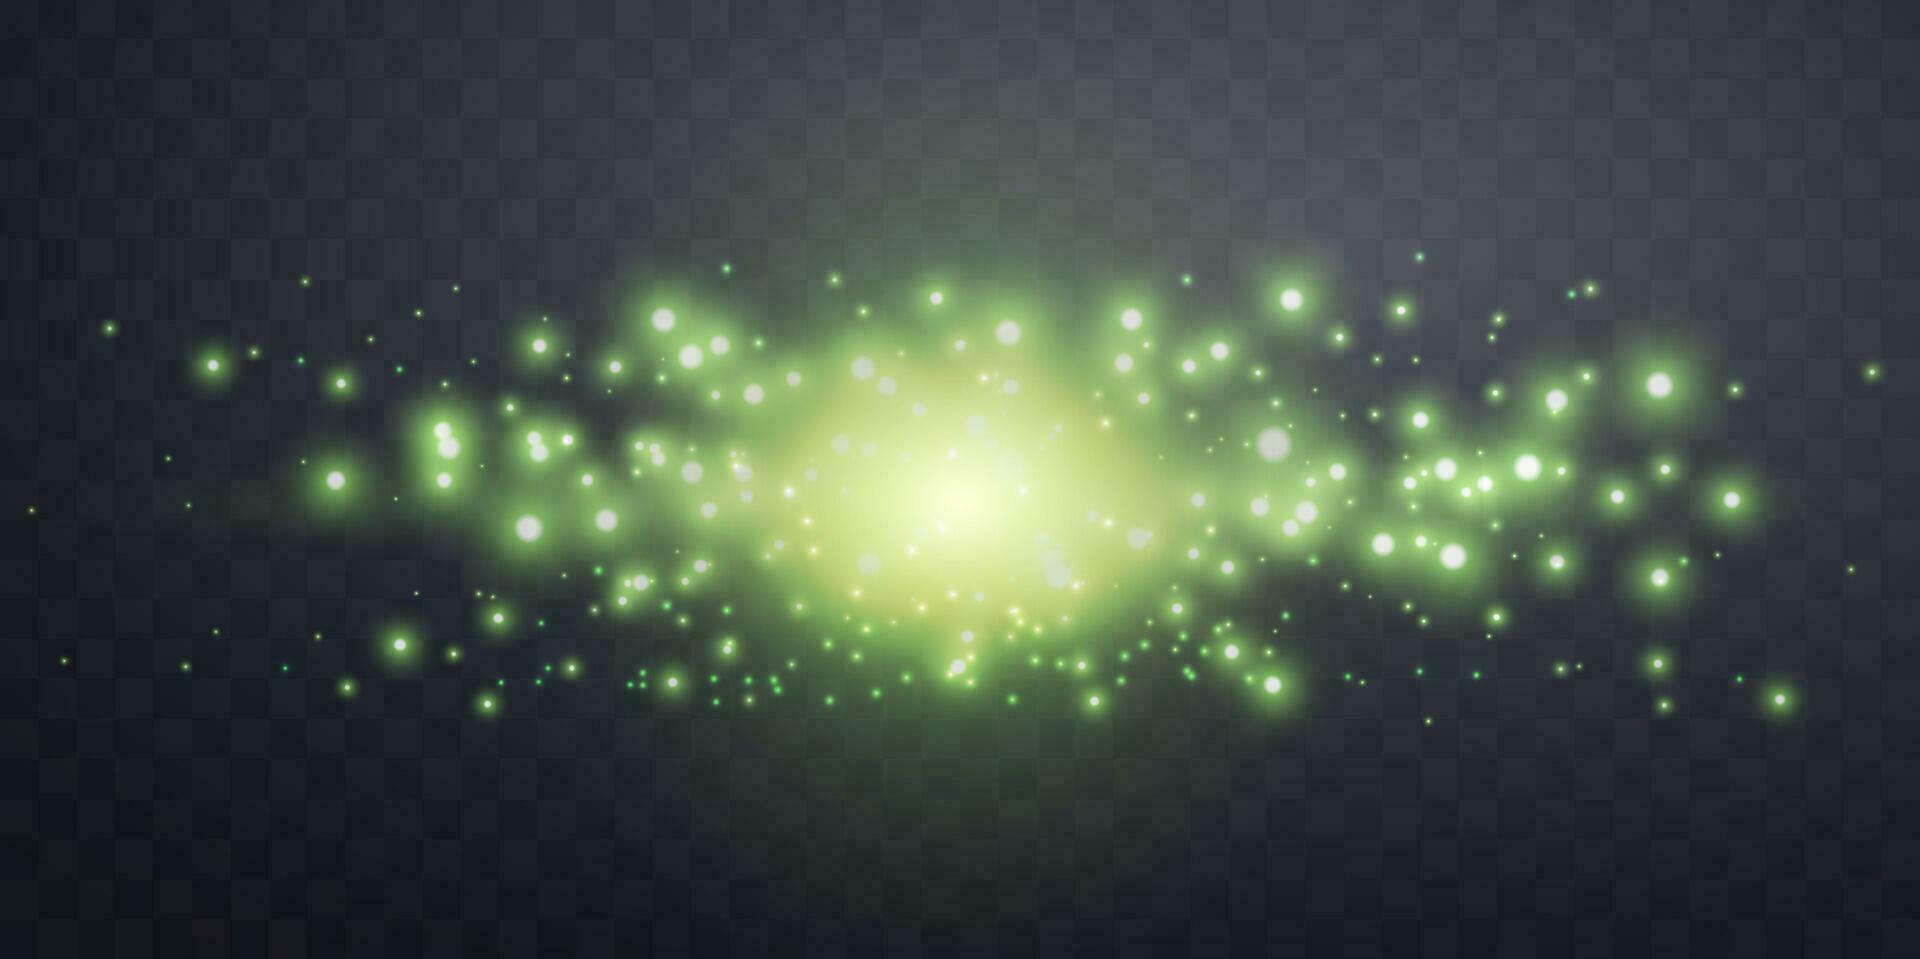 Green horizontal lensflare. Light flash with rays or green spotlight. Glow flare light effect. Vector illustration. Isolated on dark background